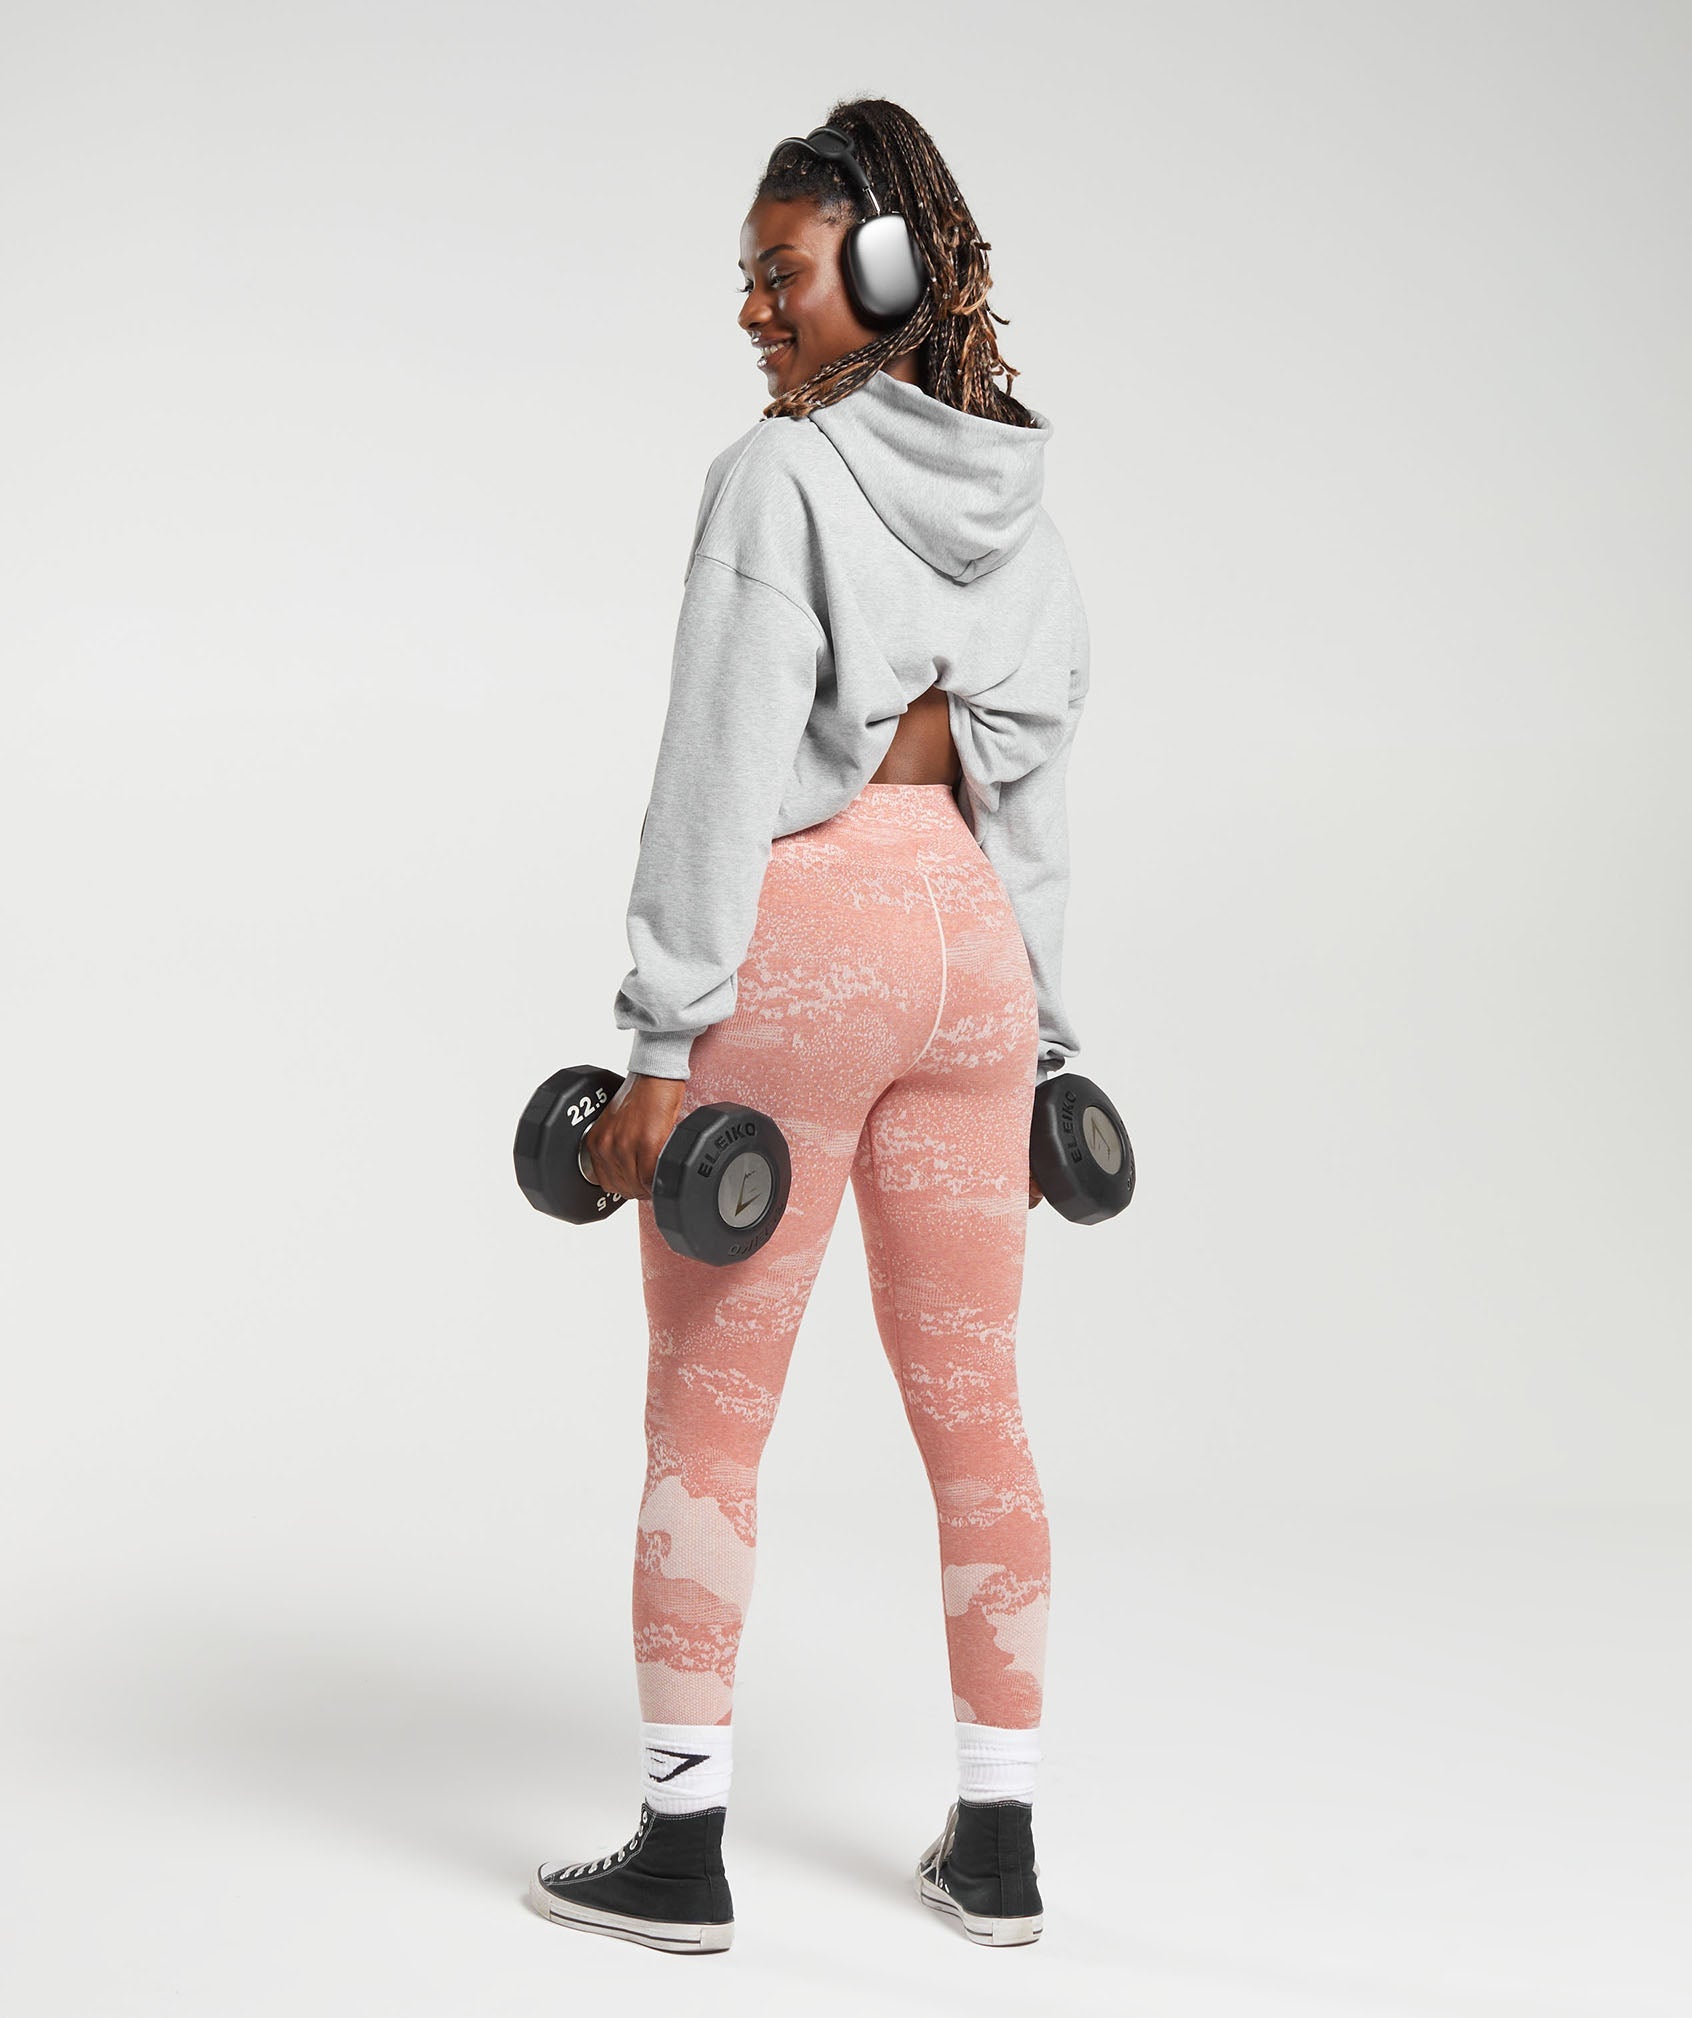 Adapt Camo Seamless Leggings in Misty Pink/Hazy Pink - view 4